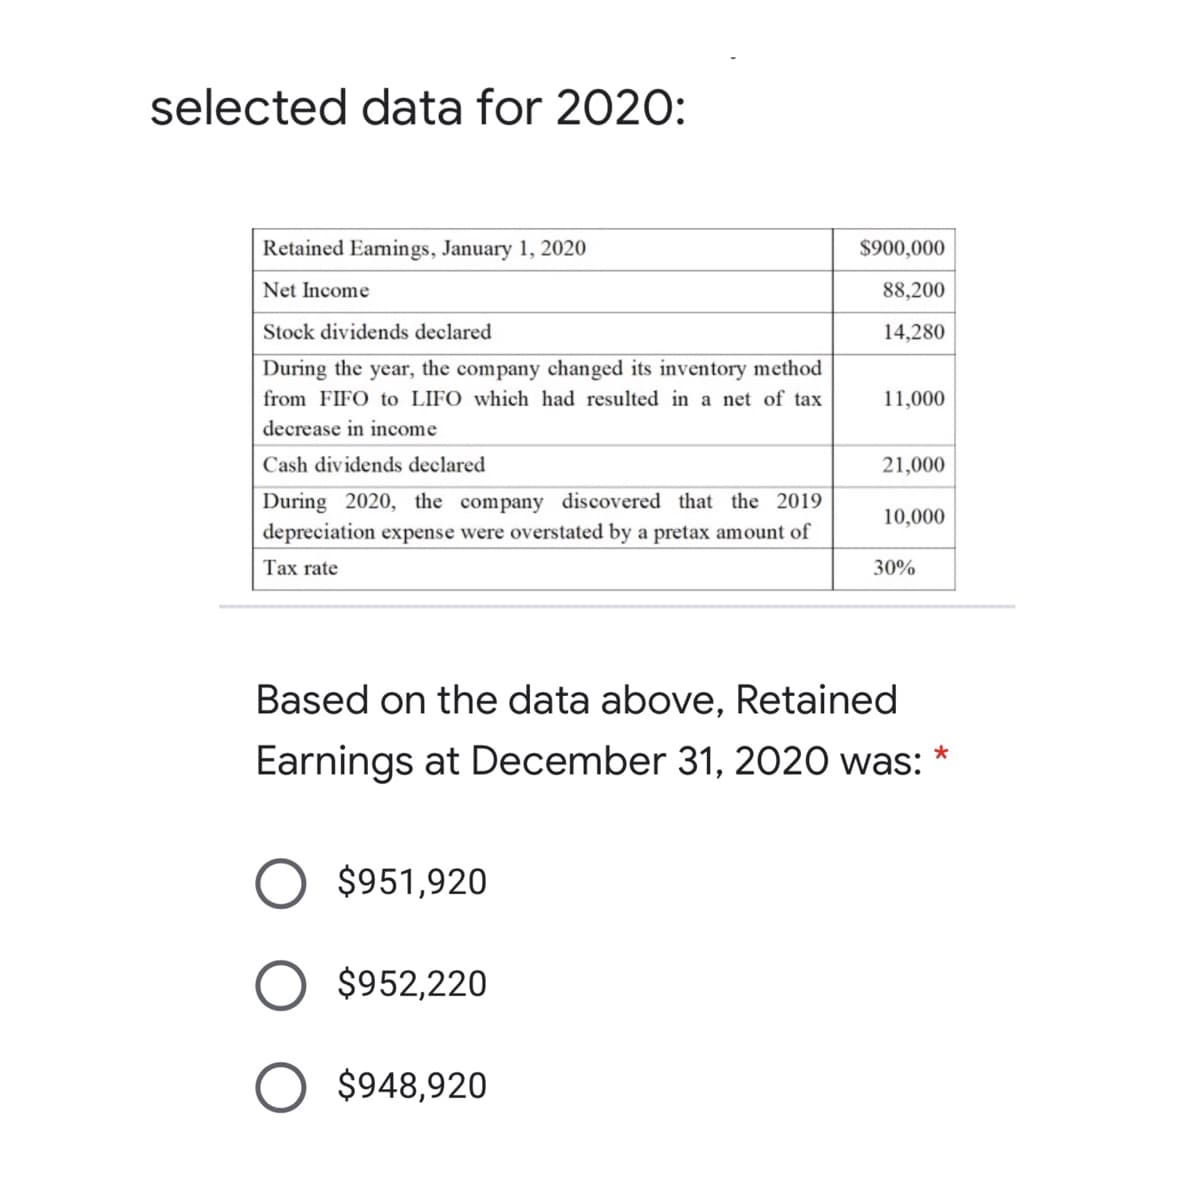 selected data for 2020:
Retained Eamings, January 1, 2020
$900,000
Net Income
88,200
Stock dividends declared
14,280
During the year, the company changed its inventory method
from FIFO to LIFO which had resulted in a net of tax
11,000
decrease in income
Cash dividends declared
21,000
During 2020, the company discovered that the 2019
10,000
depreciation expense were overstated by a pretax amount of
Tax rate
30%
Based on the data above, Retained
Earnings at December 31, 2020 was: *
$951,920
$952,220
$948,920
